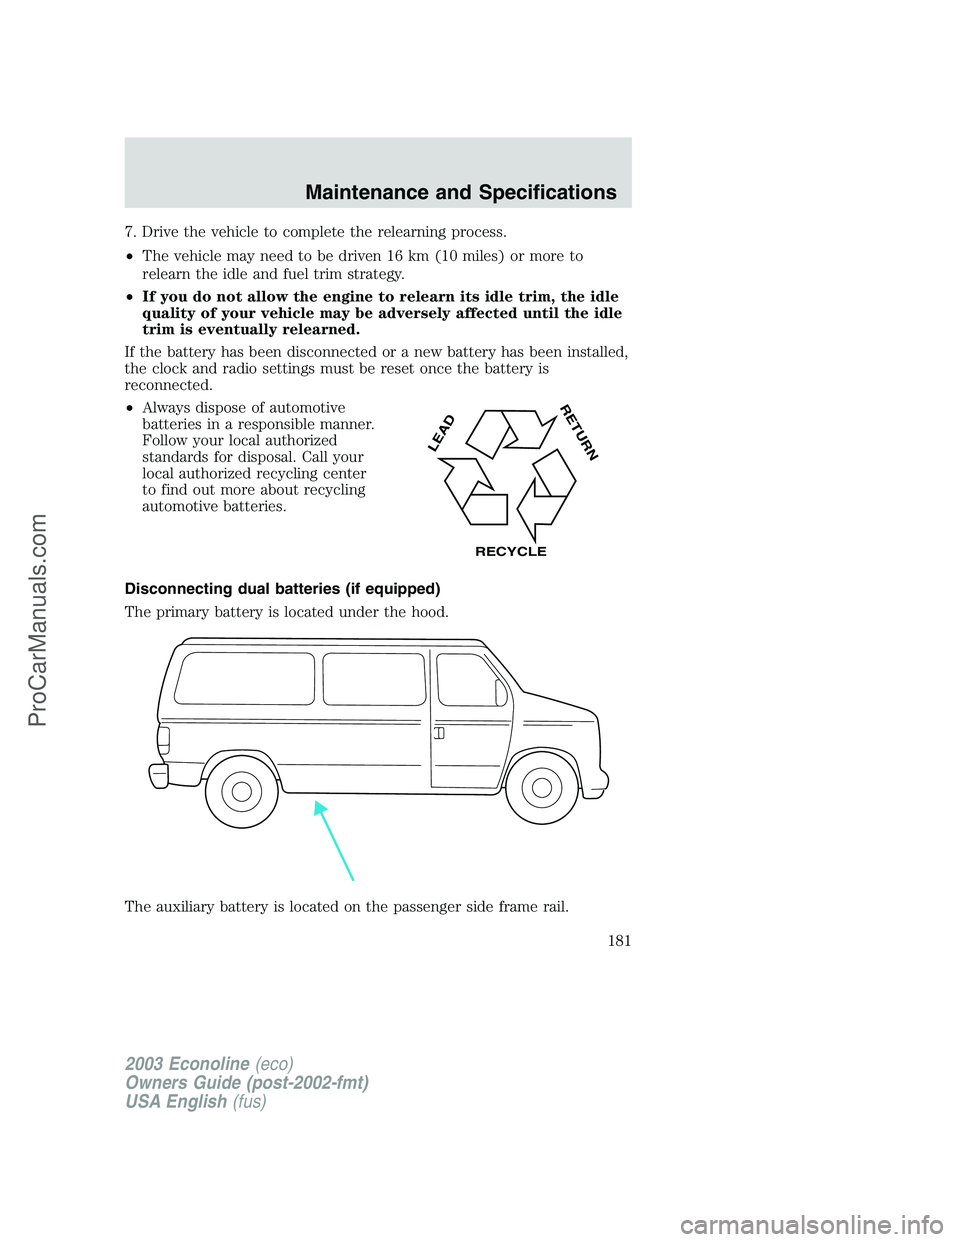 FORD ECONOLINE 2003  Owners Manual 7. Drive the vehicle to complete the relearning process.
•The vehicle may need to be driven 16 km (10 miles) or more to
relearn the idle and fuel trim strategy.
•If you do not allow the engine to 